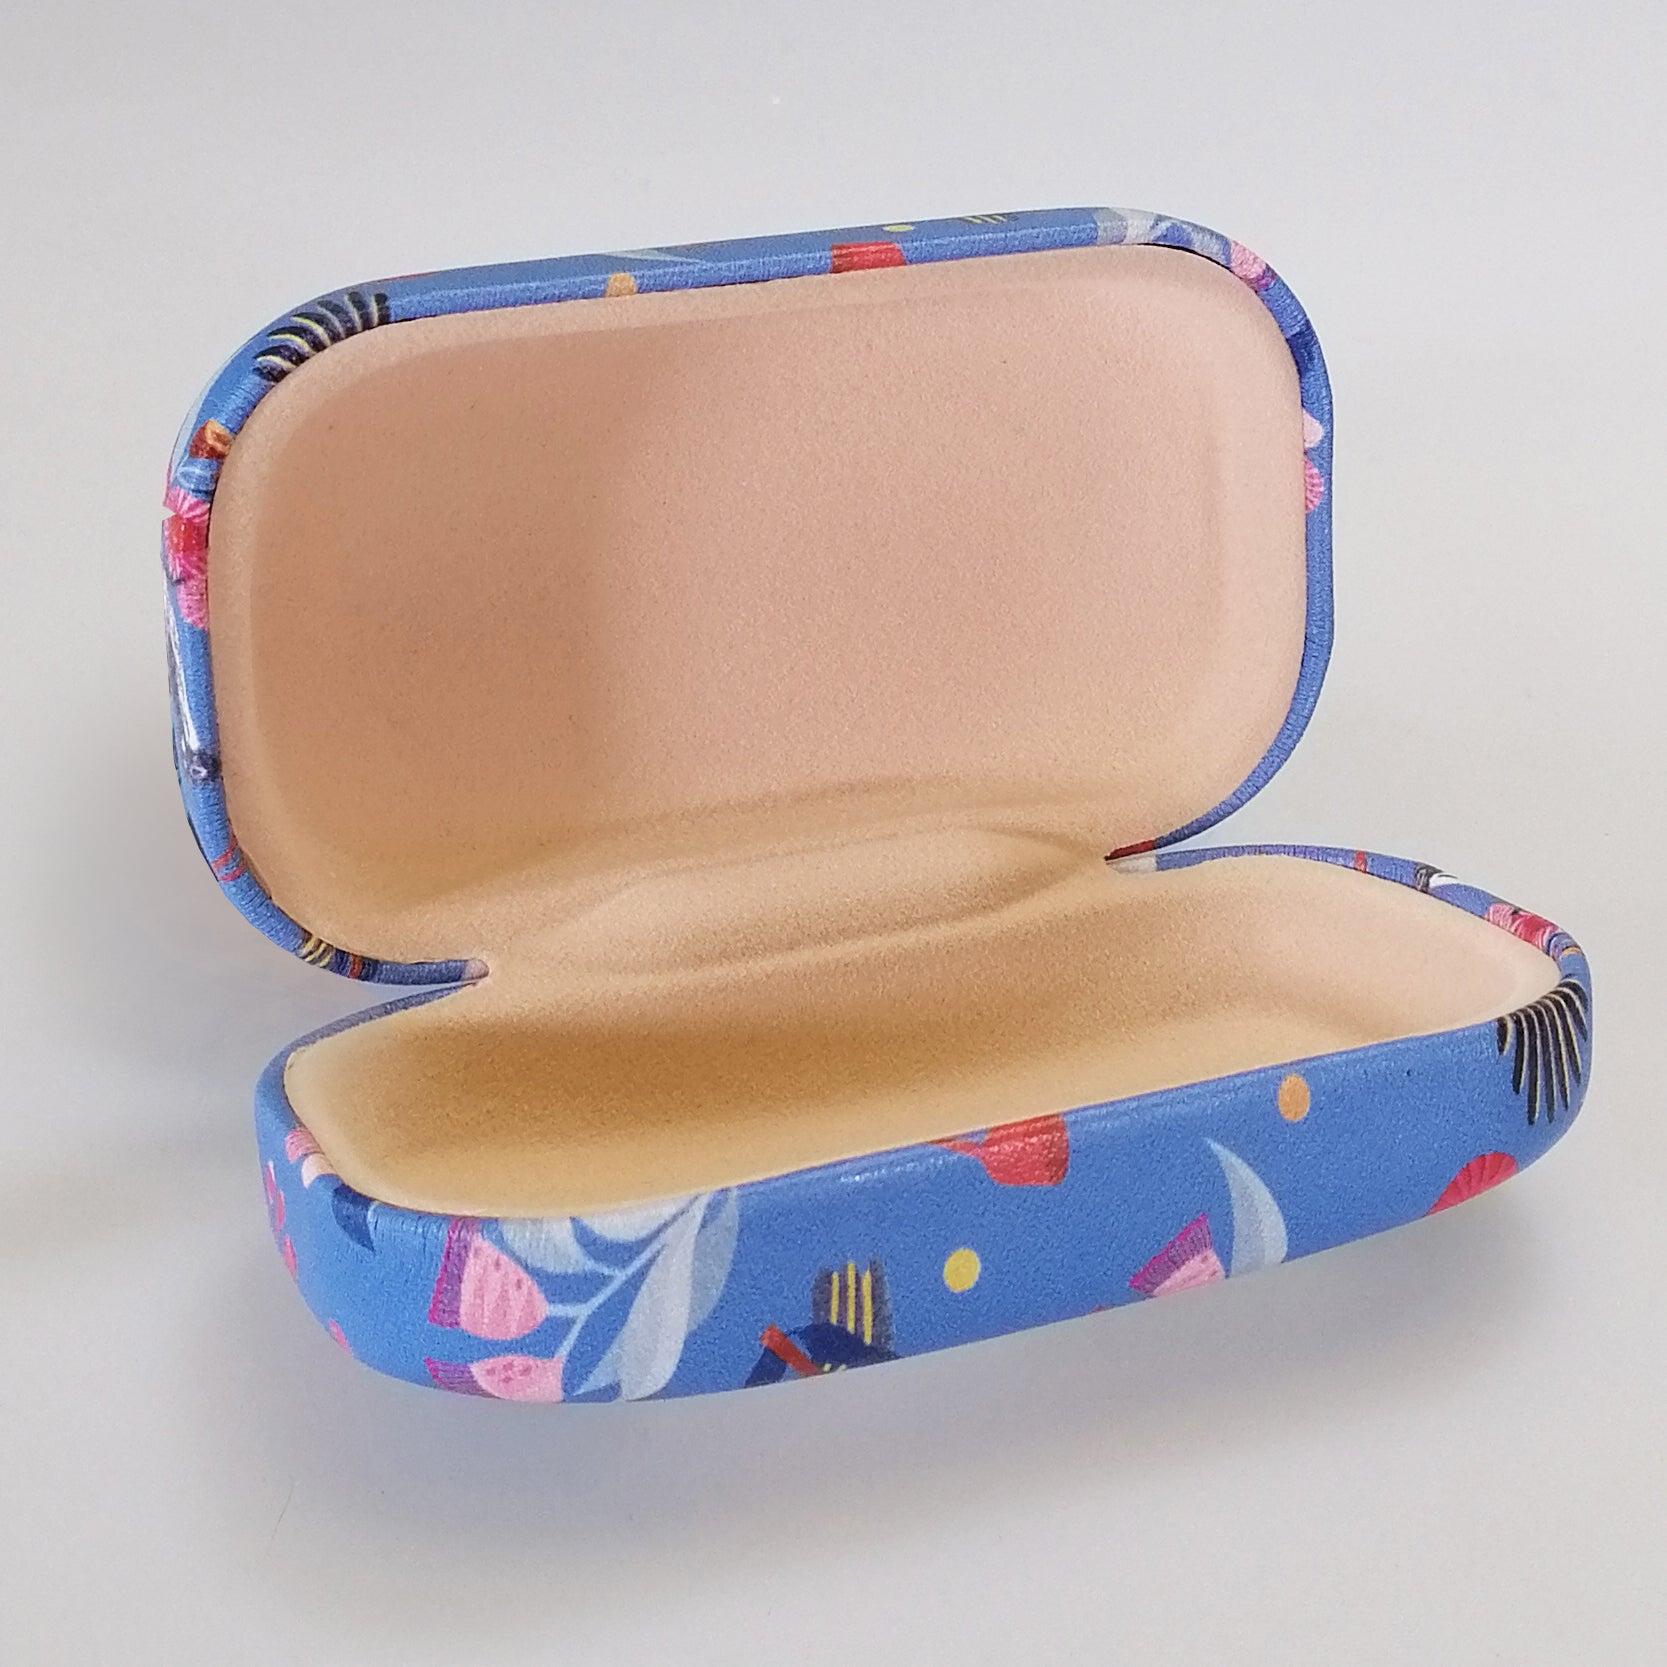 Andrea Smith - Assorted Travel Case